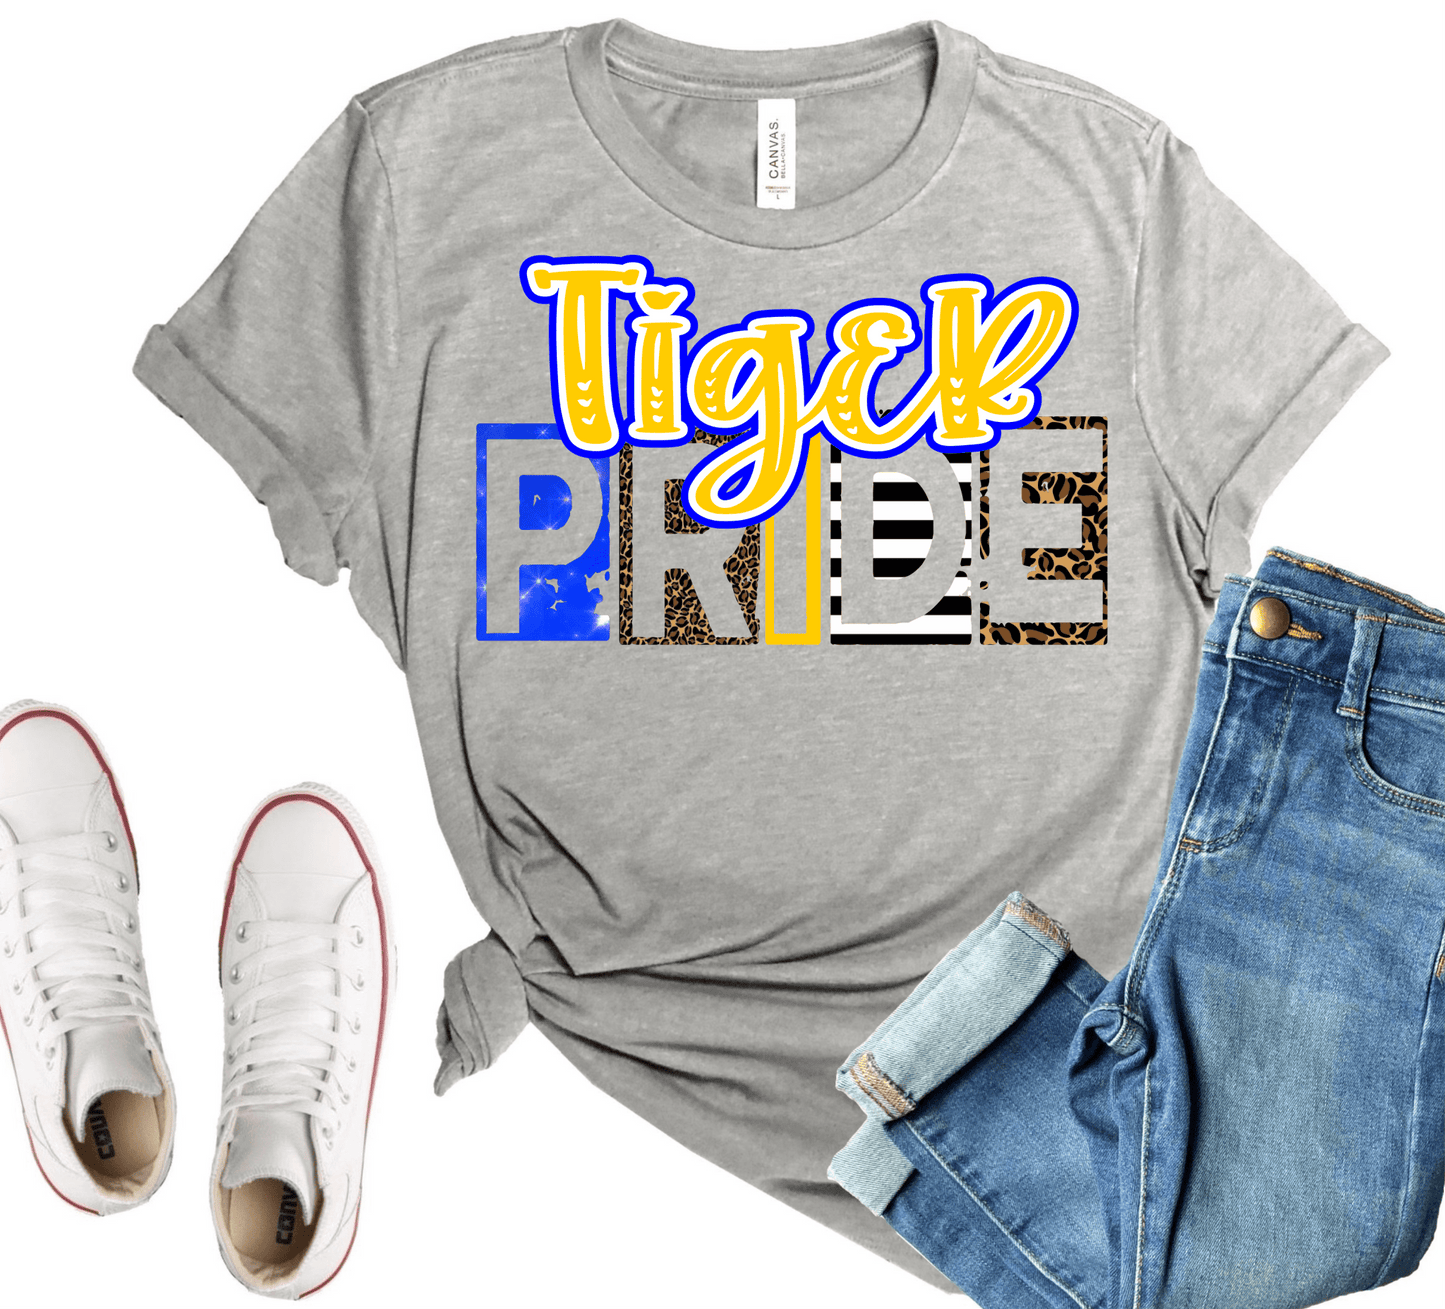 Tiger pride royal blue yellow team sports DTF TRANSFERSPRINT TO ORDER - Do it yourself Transfers